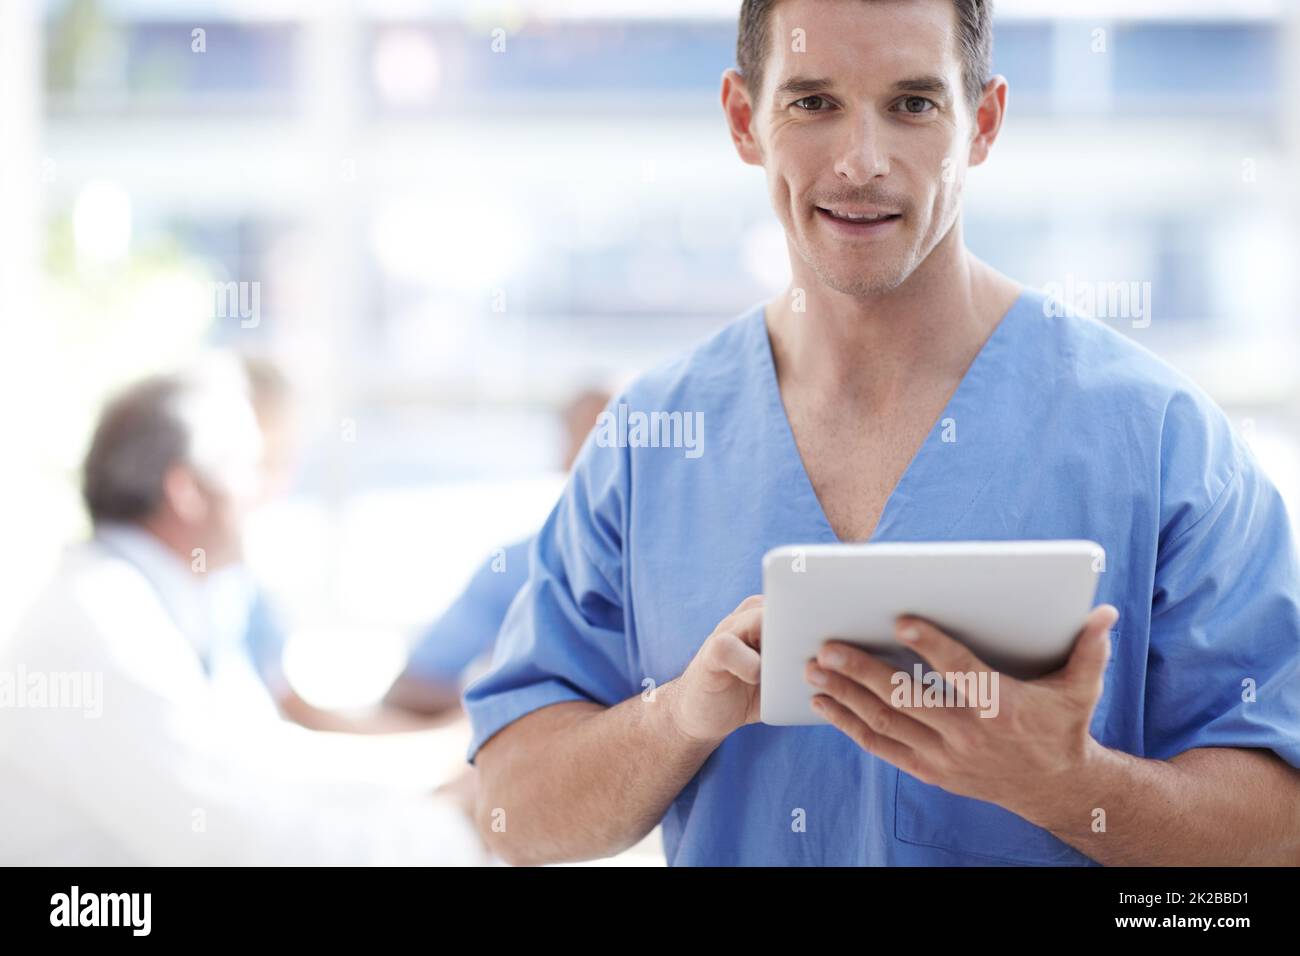 Digital doctor. A medical professional working on a touchpad with colleagues sitting in the background. Stock Photo